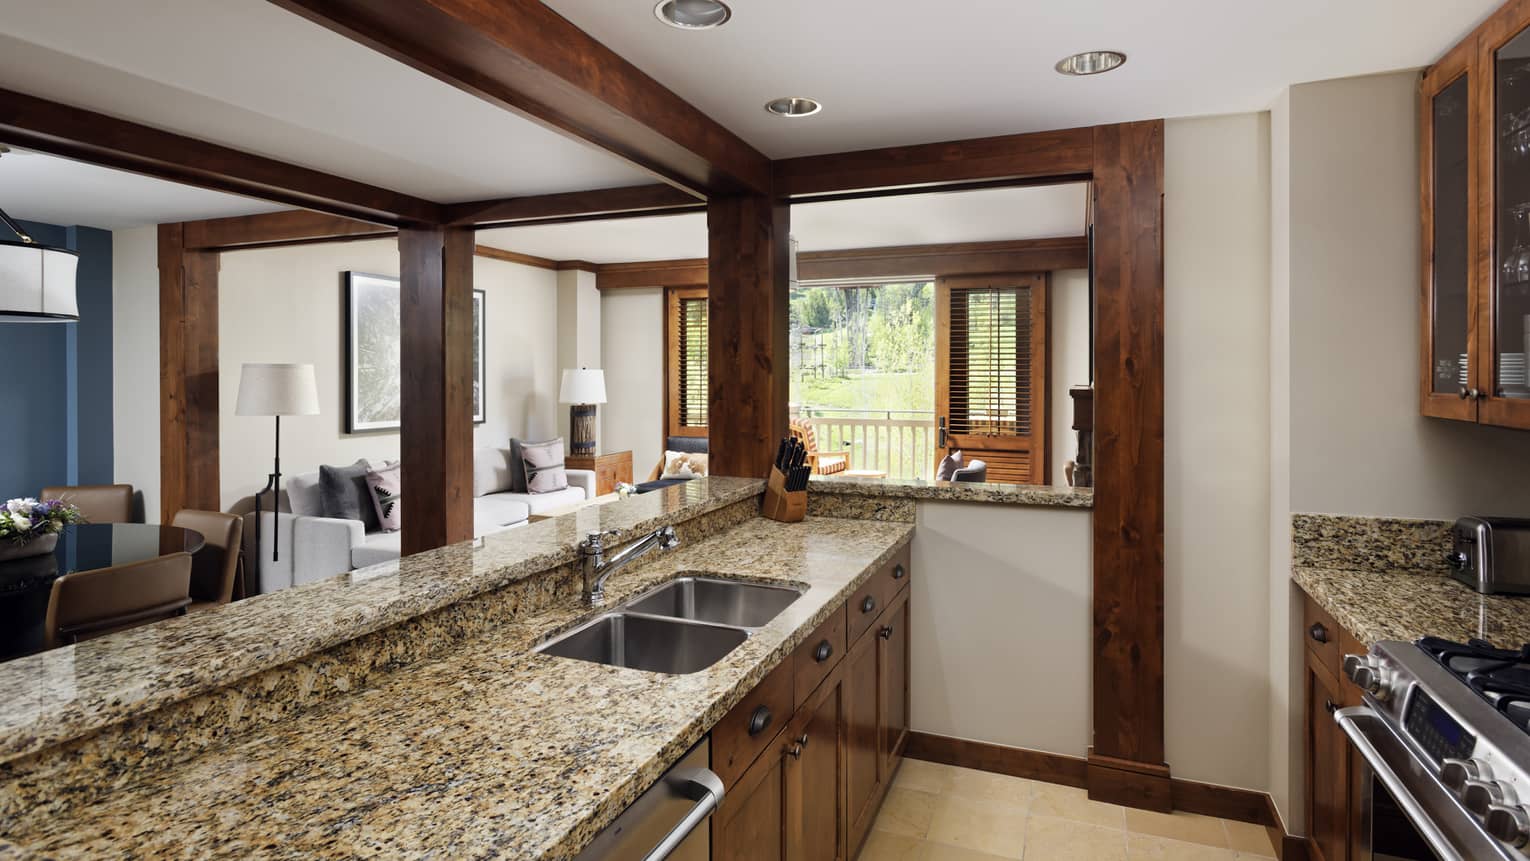 Kitchen with exposed bar counter, granite countertops